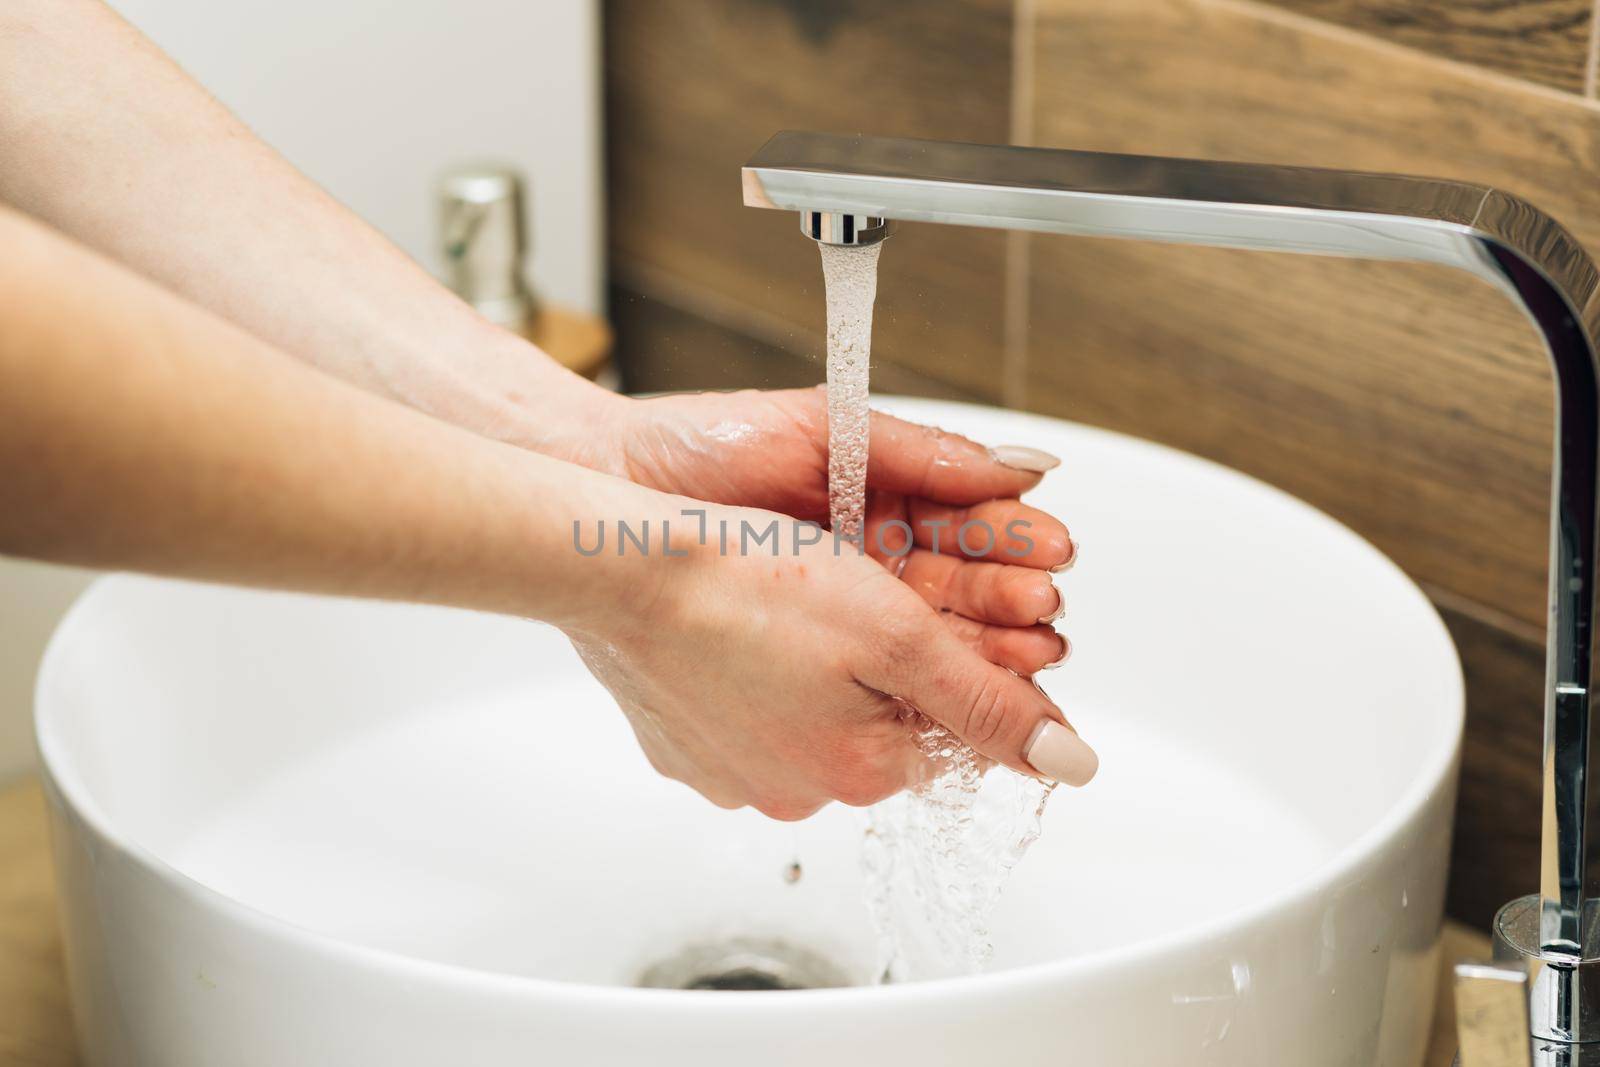 Hands of woman wash their hands in a sink to wash the skin and water flows through the hands. Concept of health, cleaning and preventing germs and coronavirus from contacting hands.